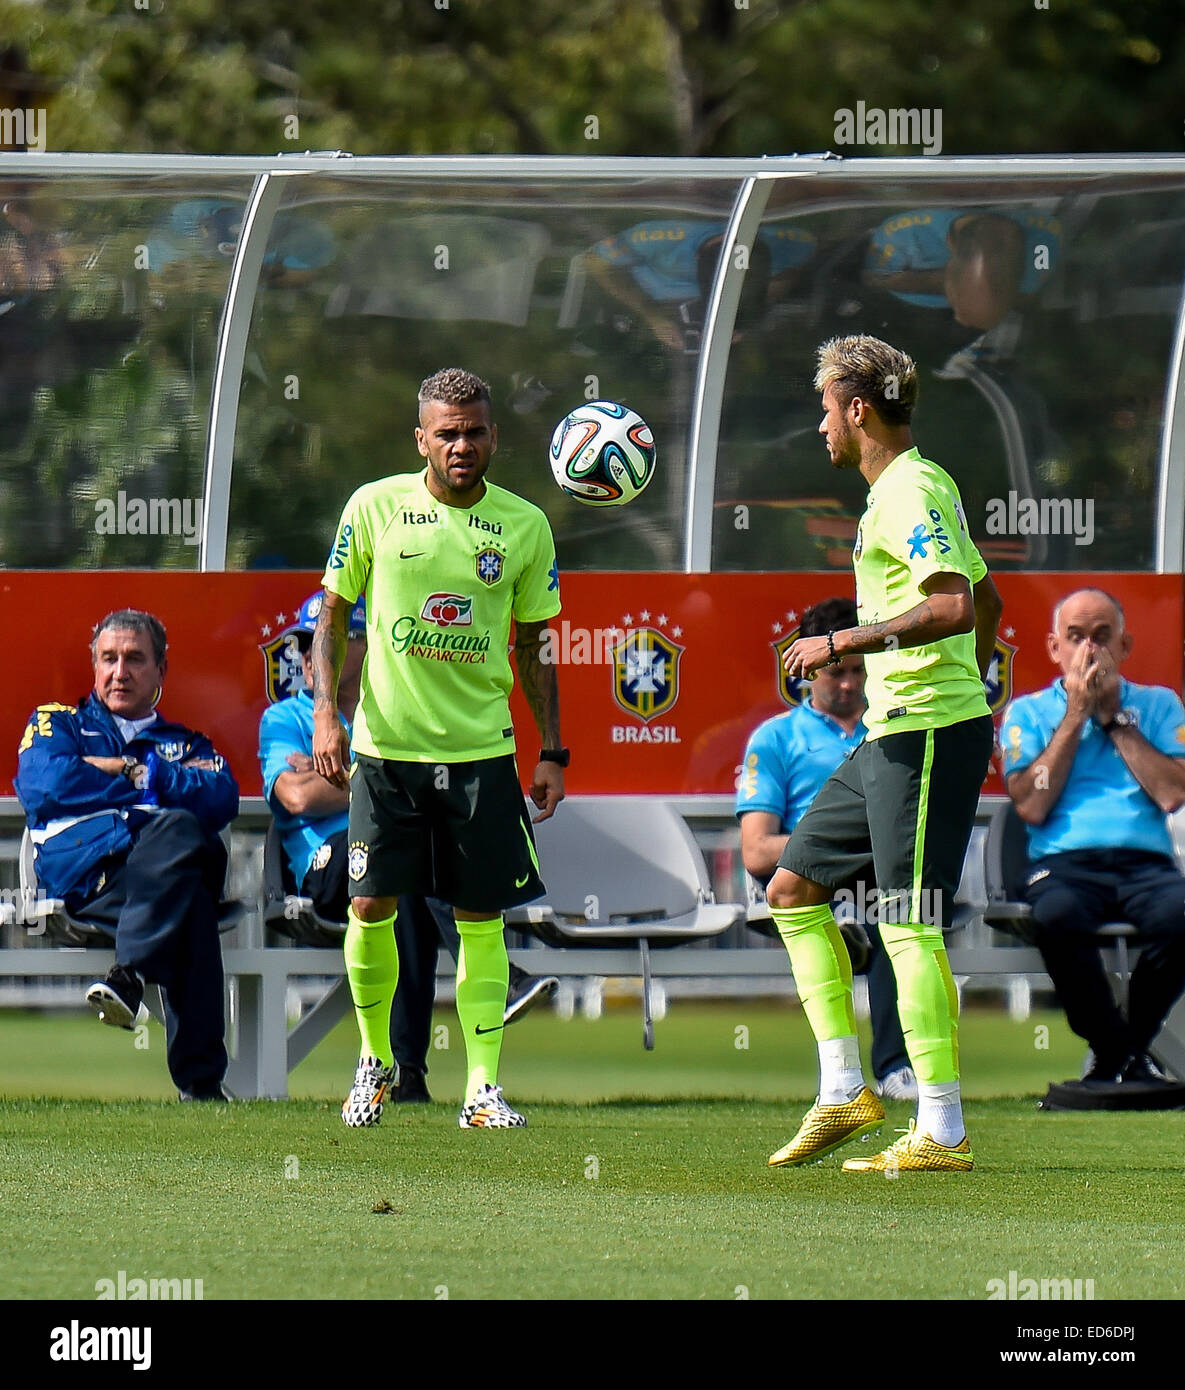 2014 FIFA World Cup - Brazil training in Belo Horizonte ahead of